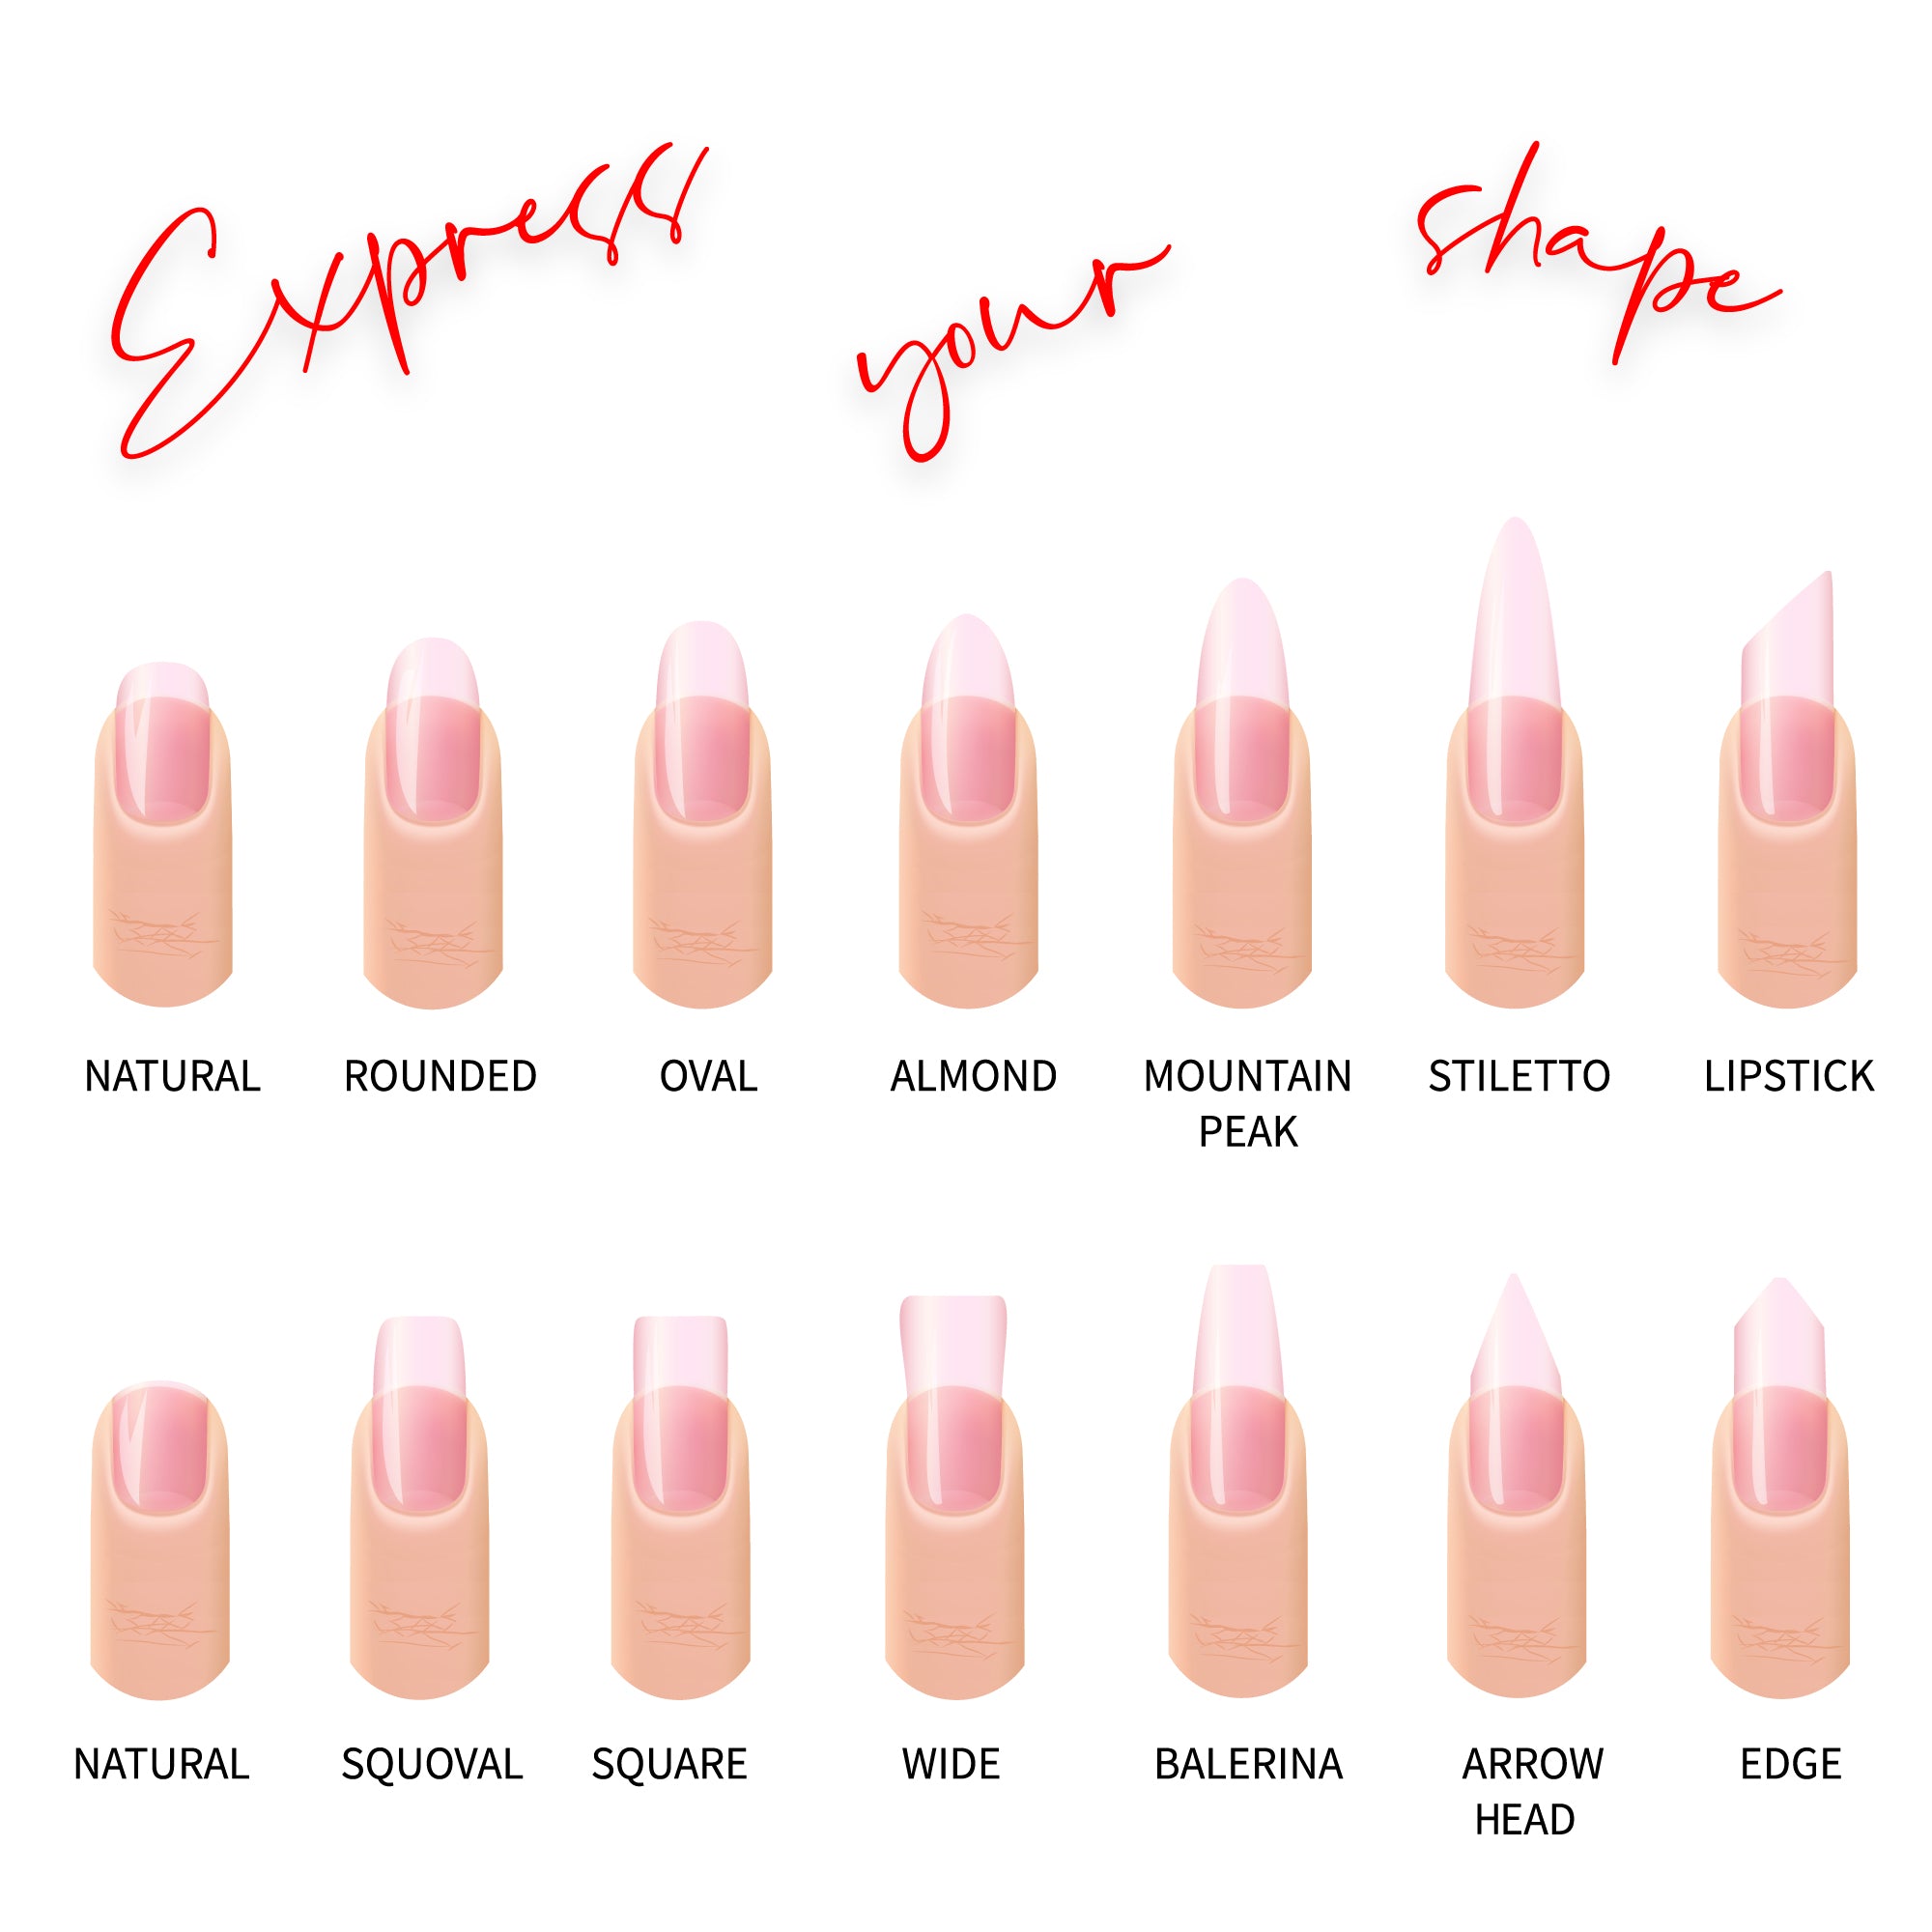 Do you have the right nail shape? – TOMICCA